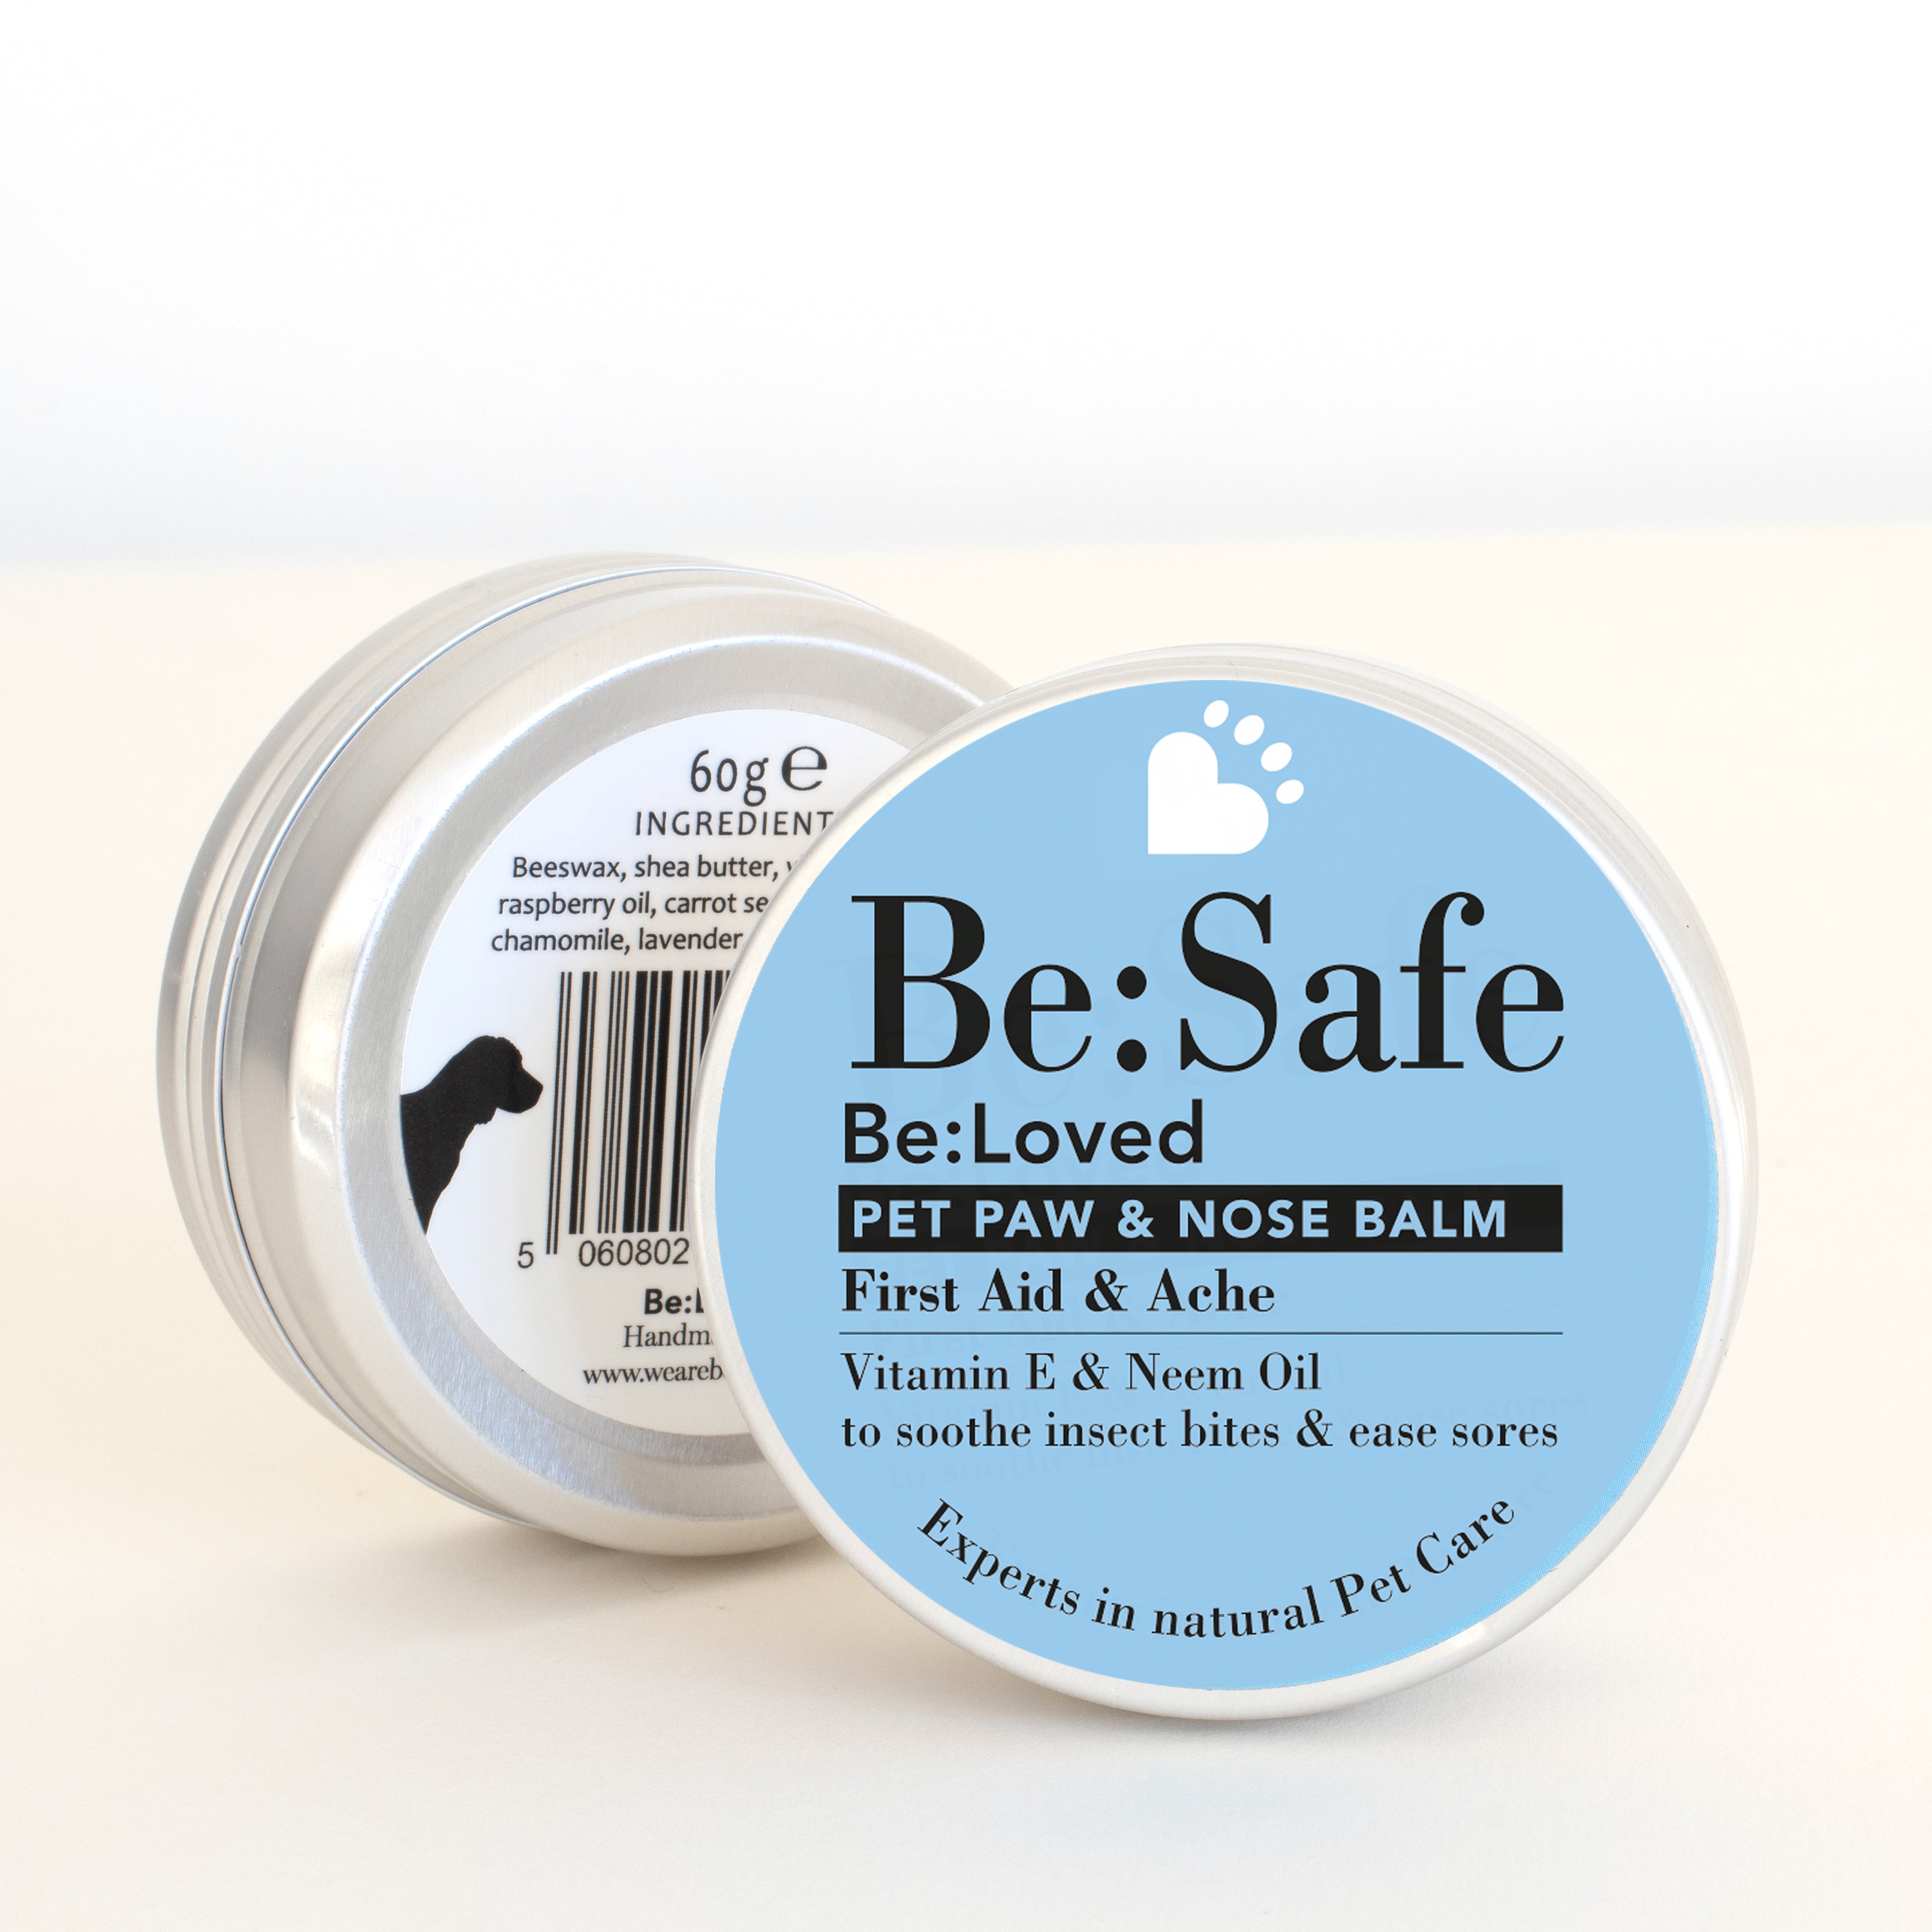 Be:safe pet paw and nose balm packaging, front and back.